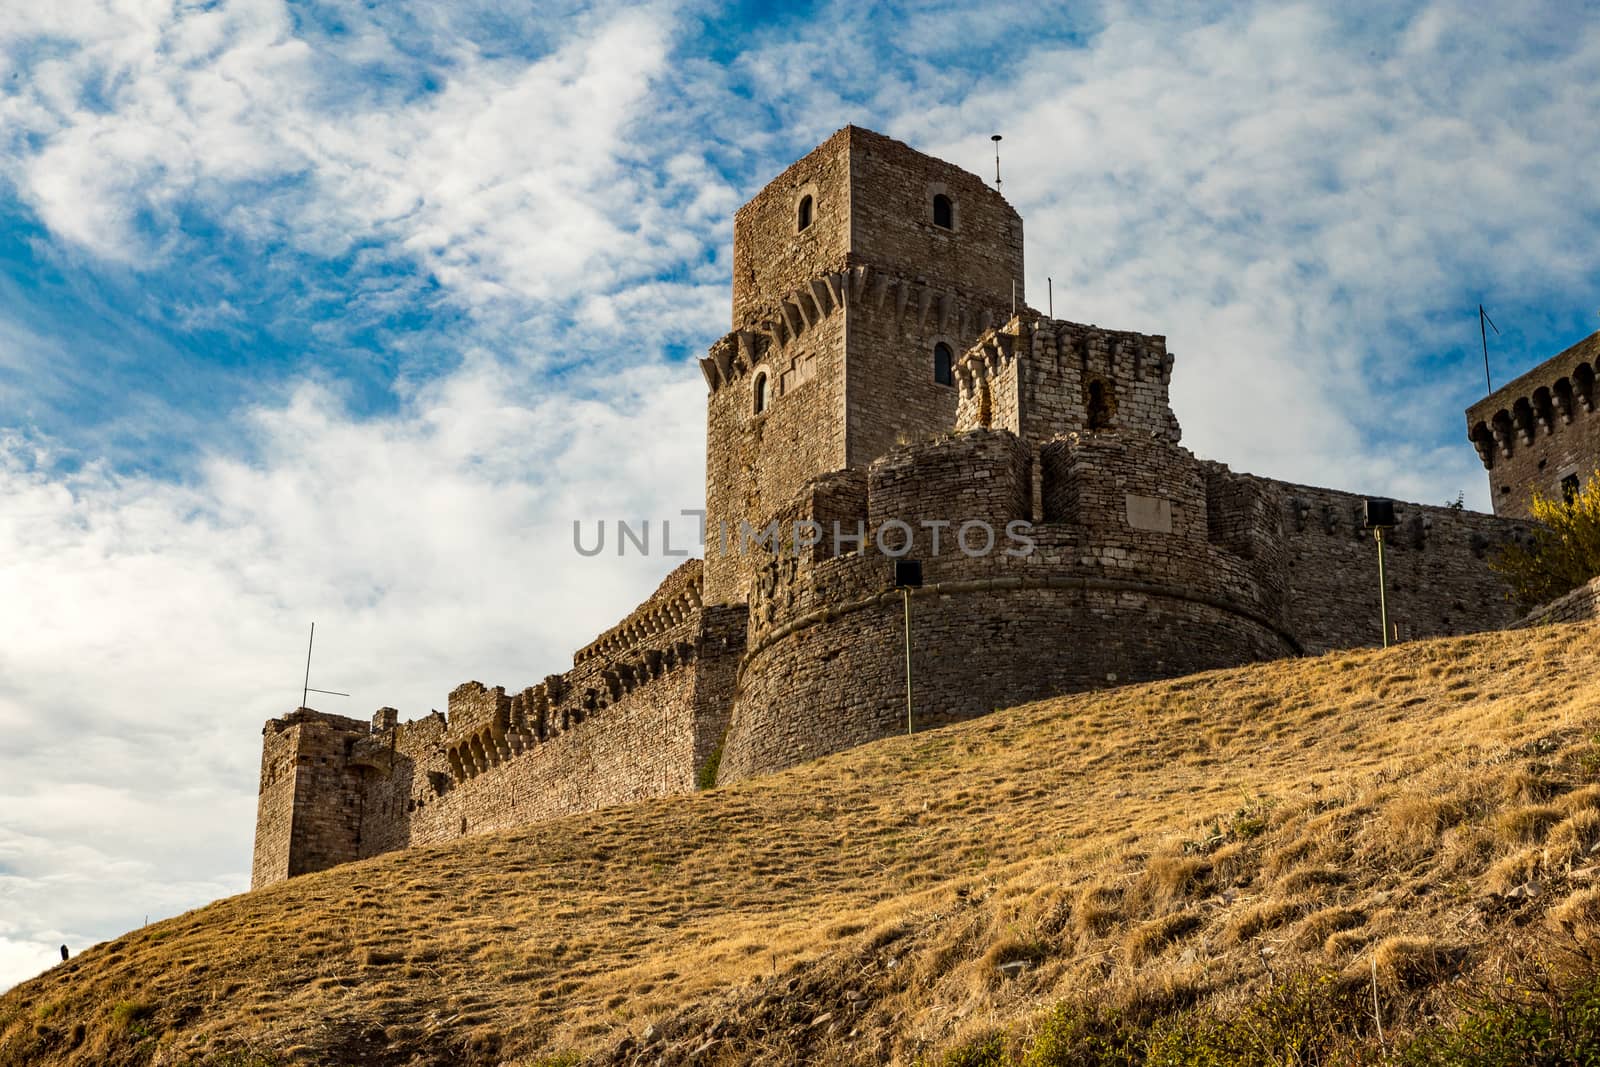 Italy: The Rocca Maggiore dominates for more than eight hundred years the citadel of Assisi and the valley of the Tescio, constituting the most valid fortification for their defense.